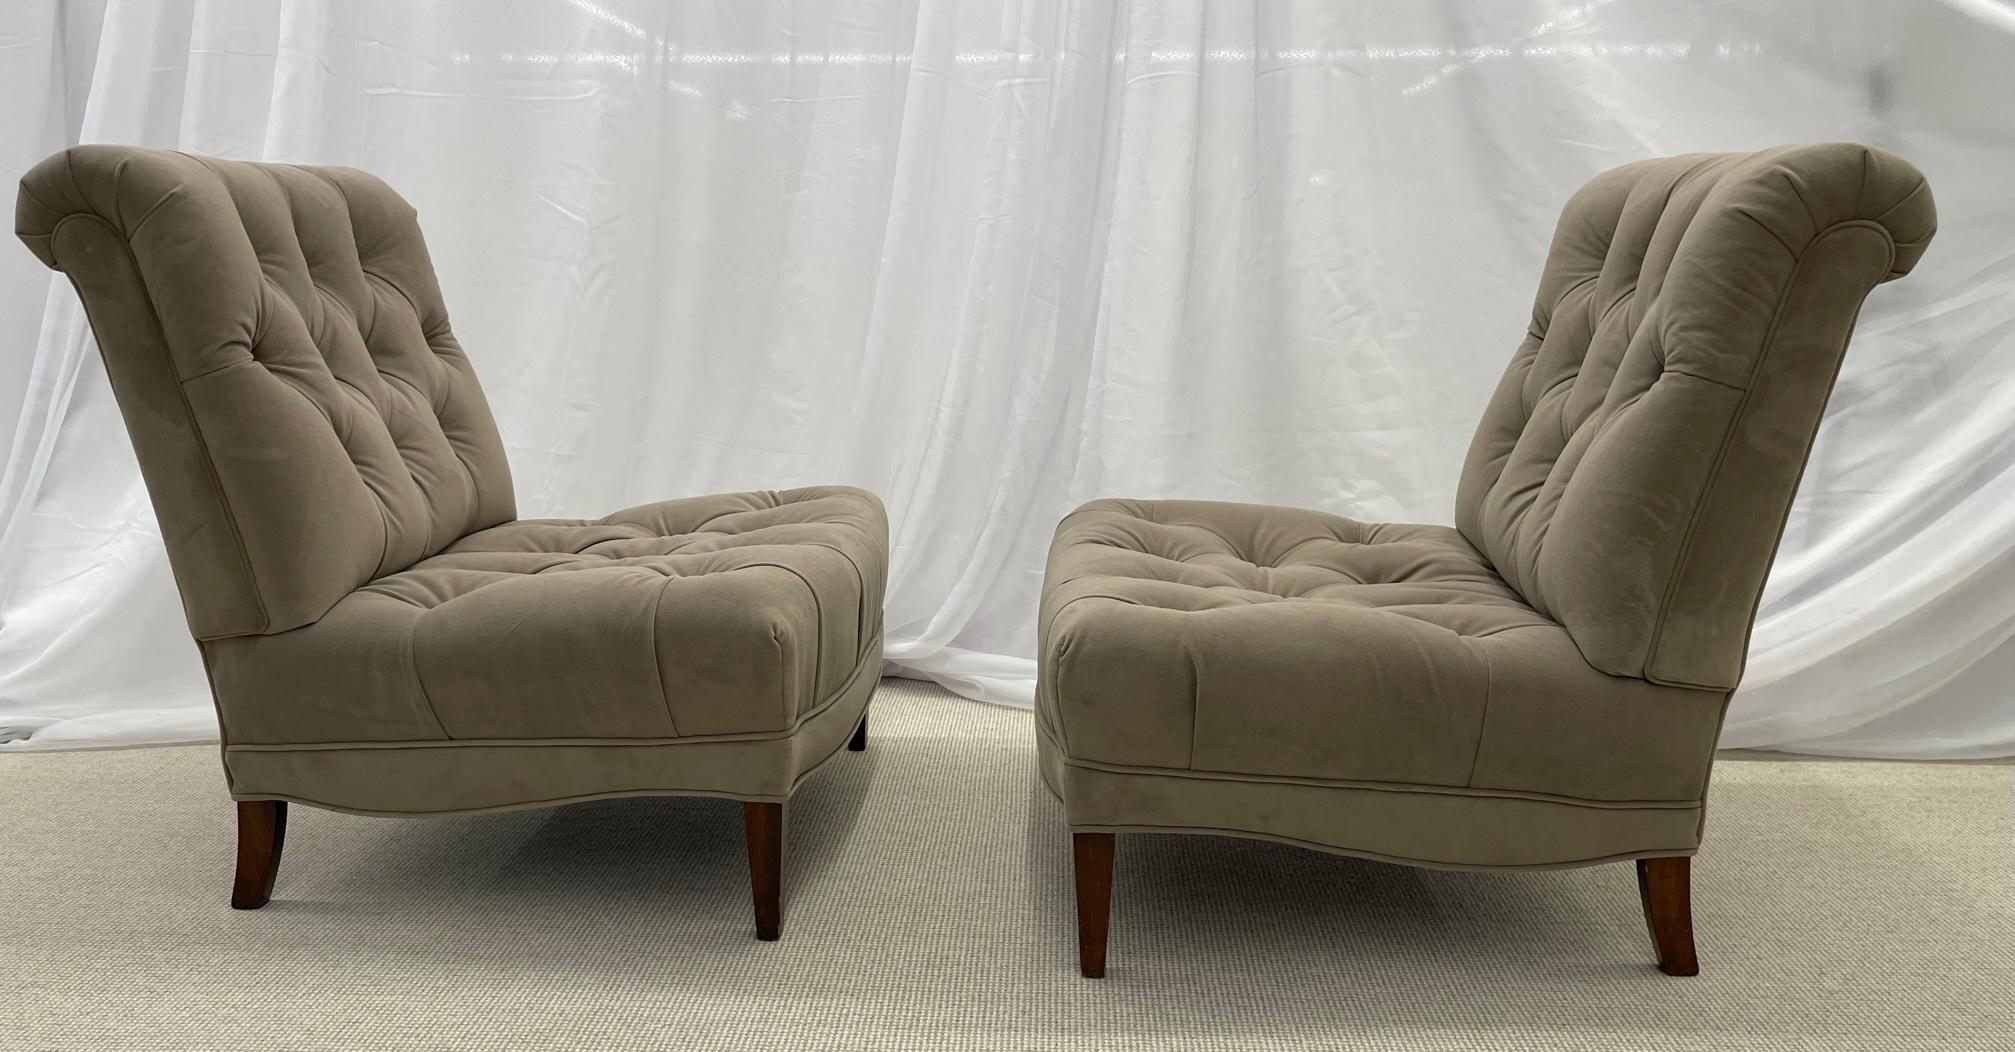 Pair Mid-Century Modern Slipper/Lounge Chairs, American Designer, Tufted, Suede	 For Sale 6